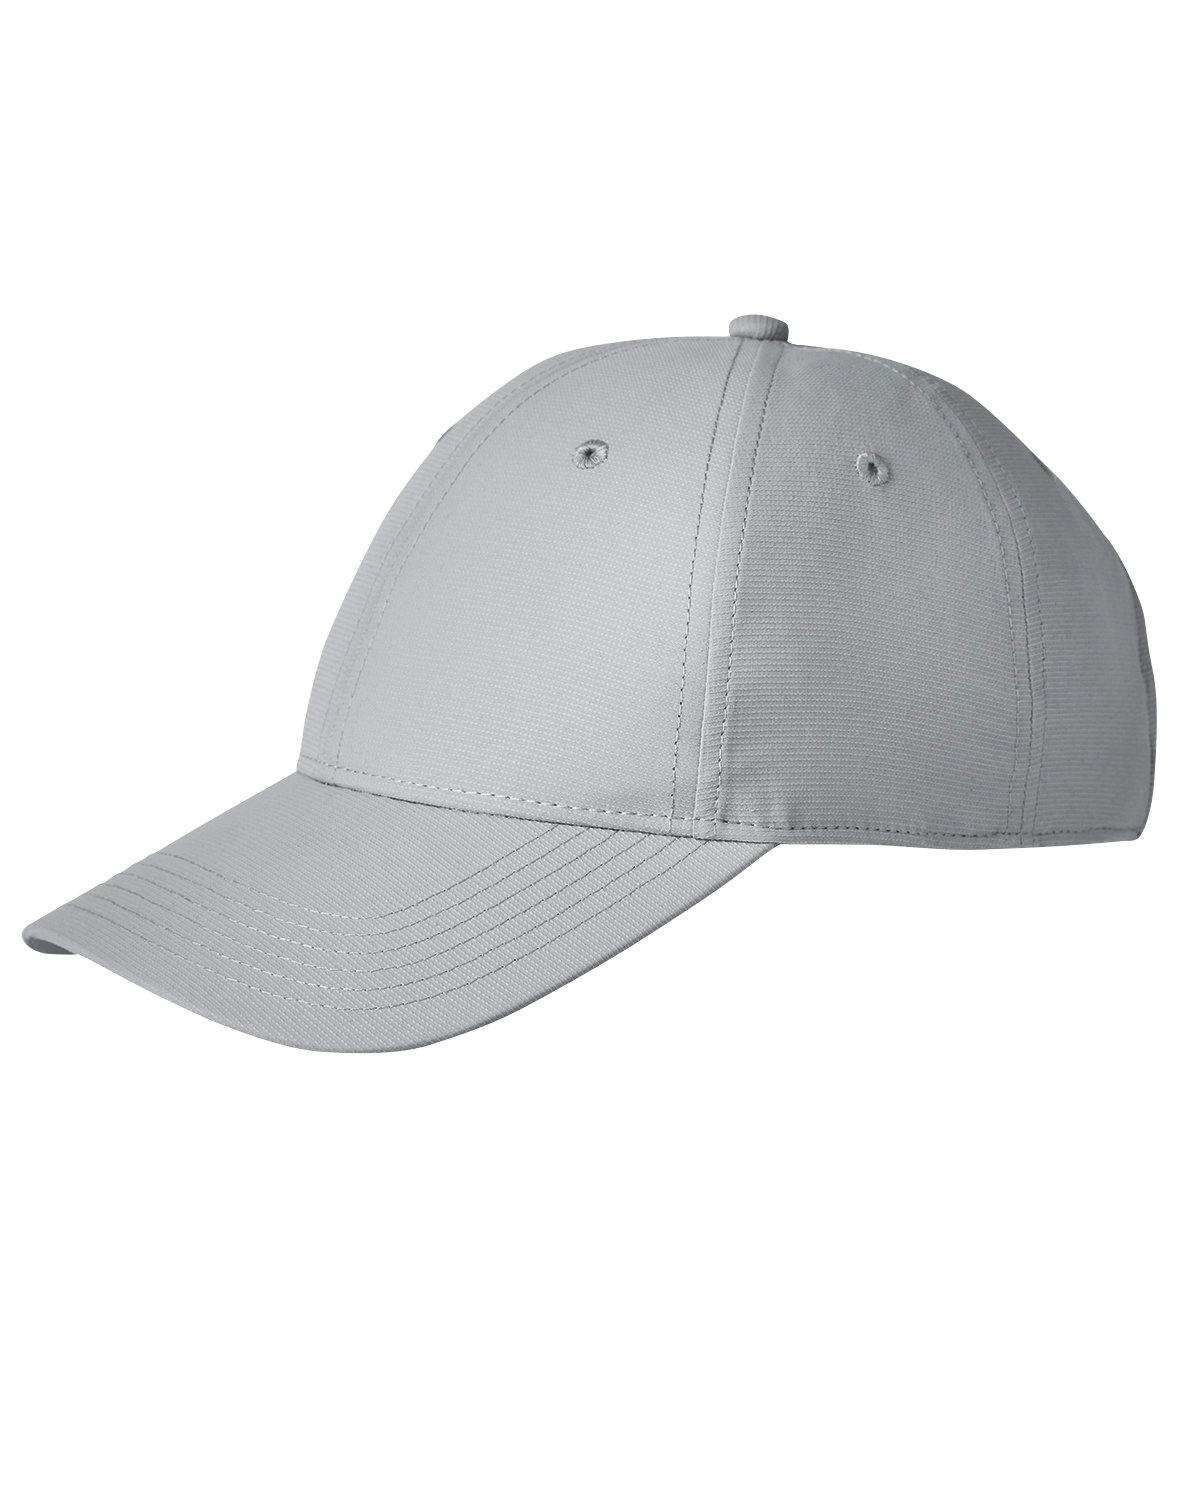 Image for Adult Pounce Adjustable Cap